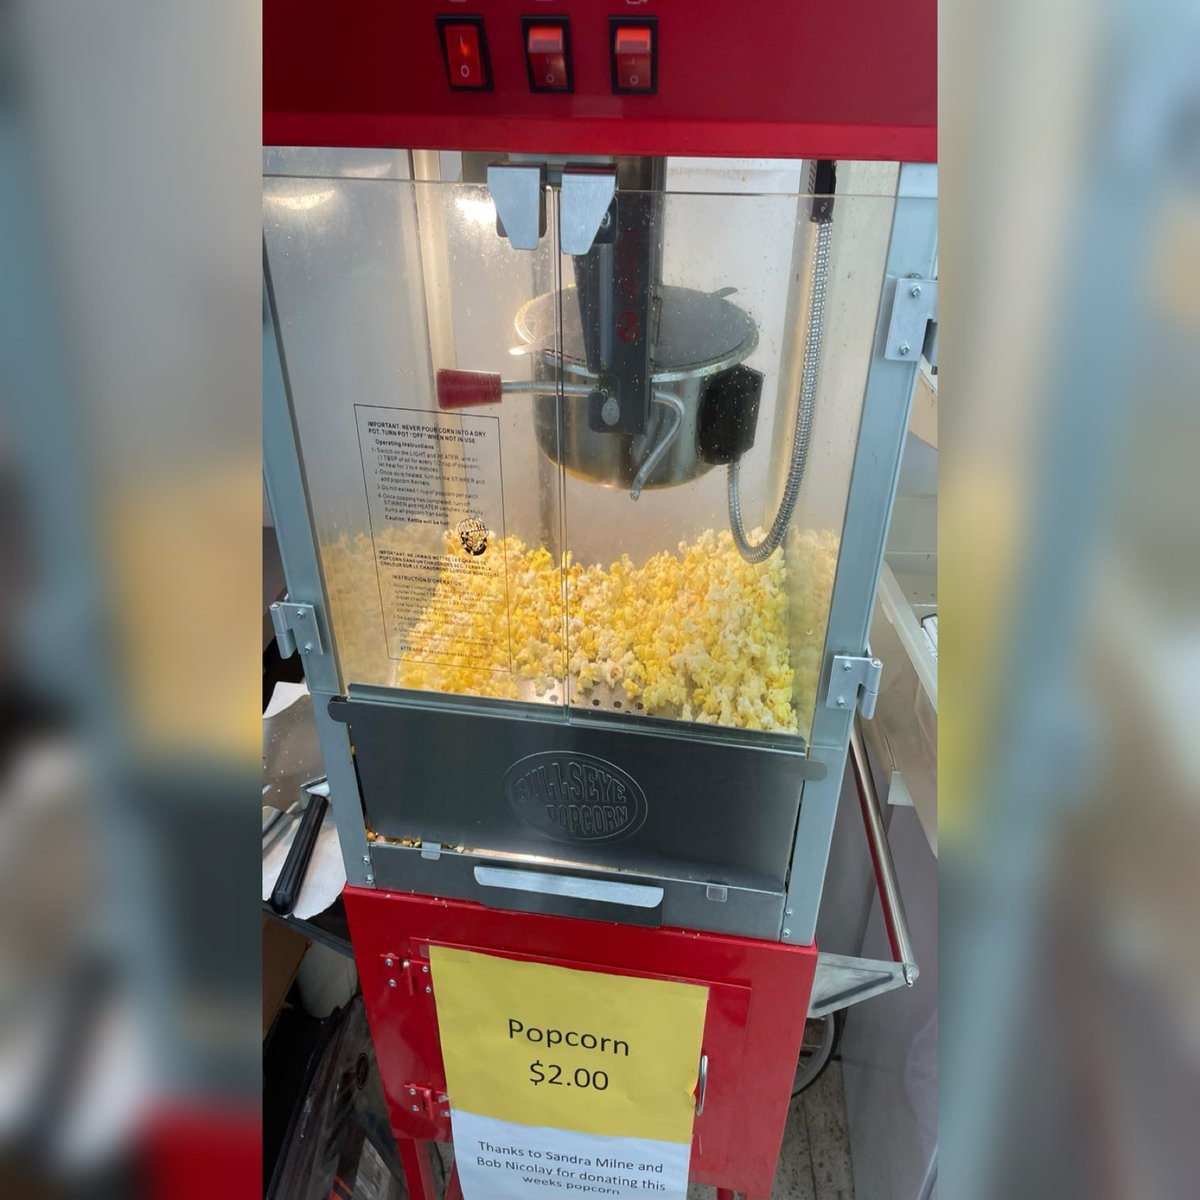 Did you know that #ThePost has popcorn every day now? We hear that it’s quickly become a favourite of many customers. At $2.00 a bag how can you go wrong?! Head downtown to see what else is new at The Post! #PostAboutThePost